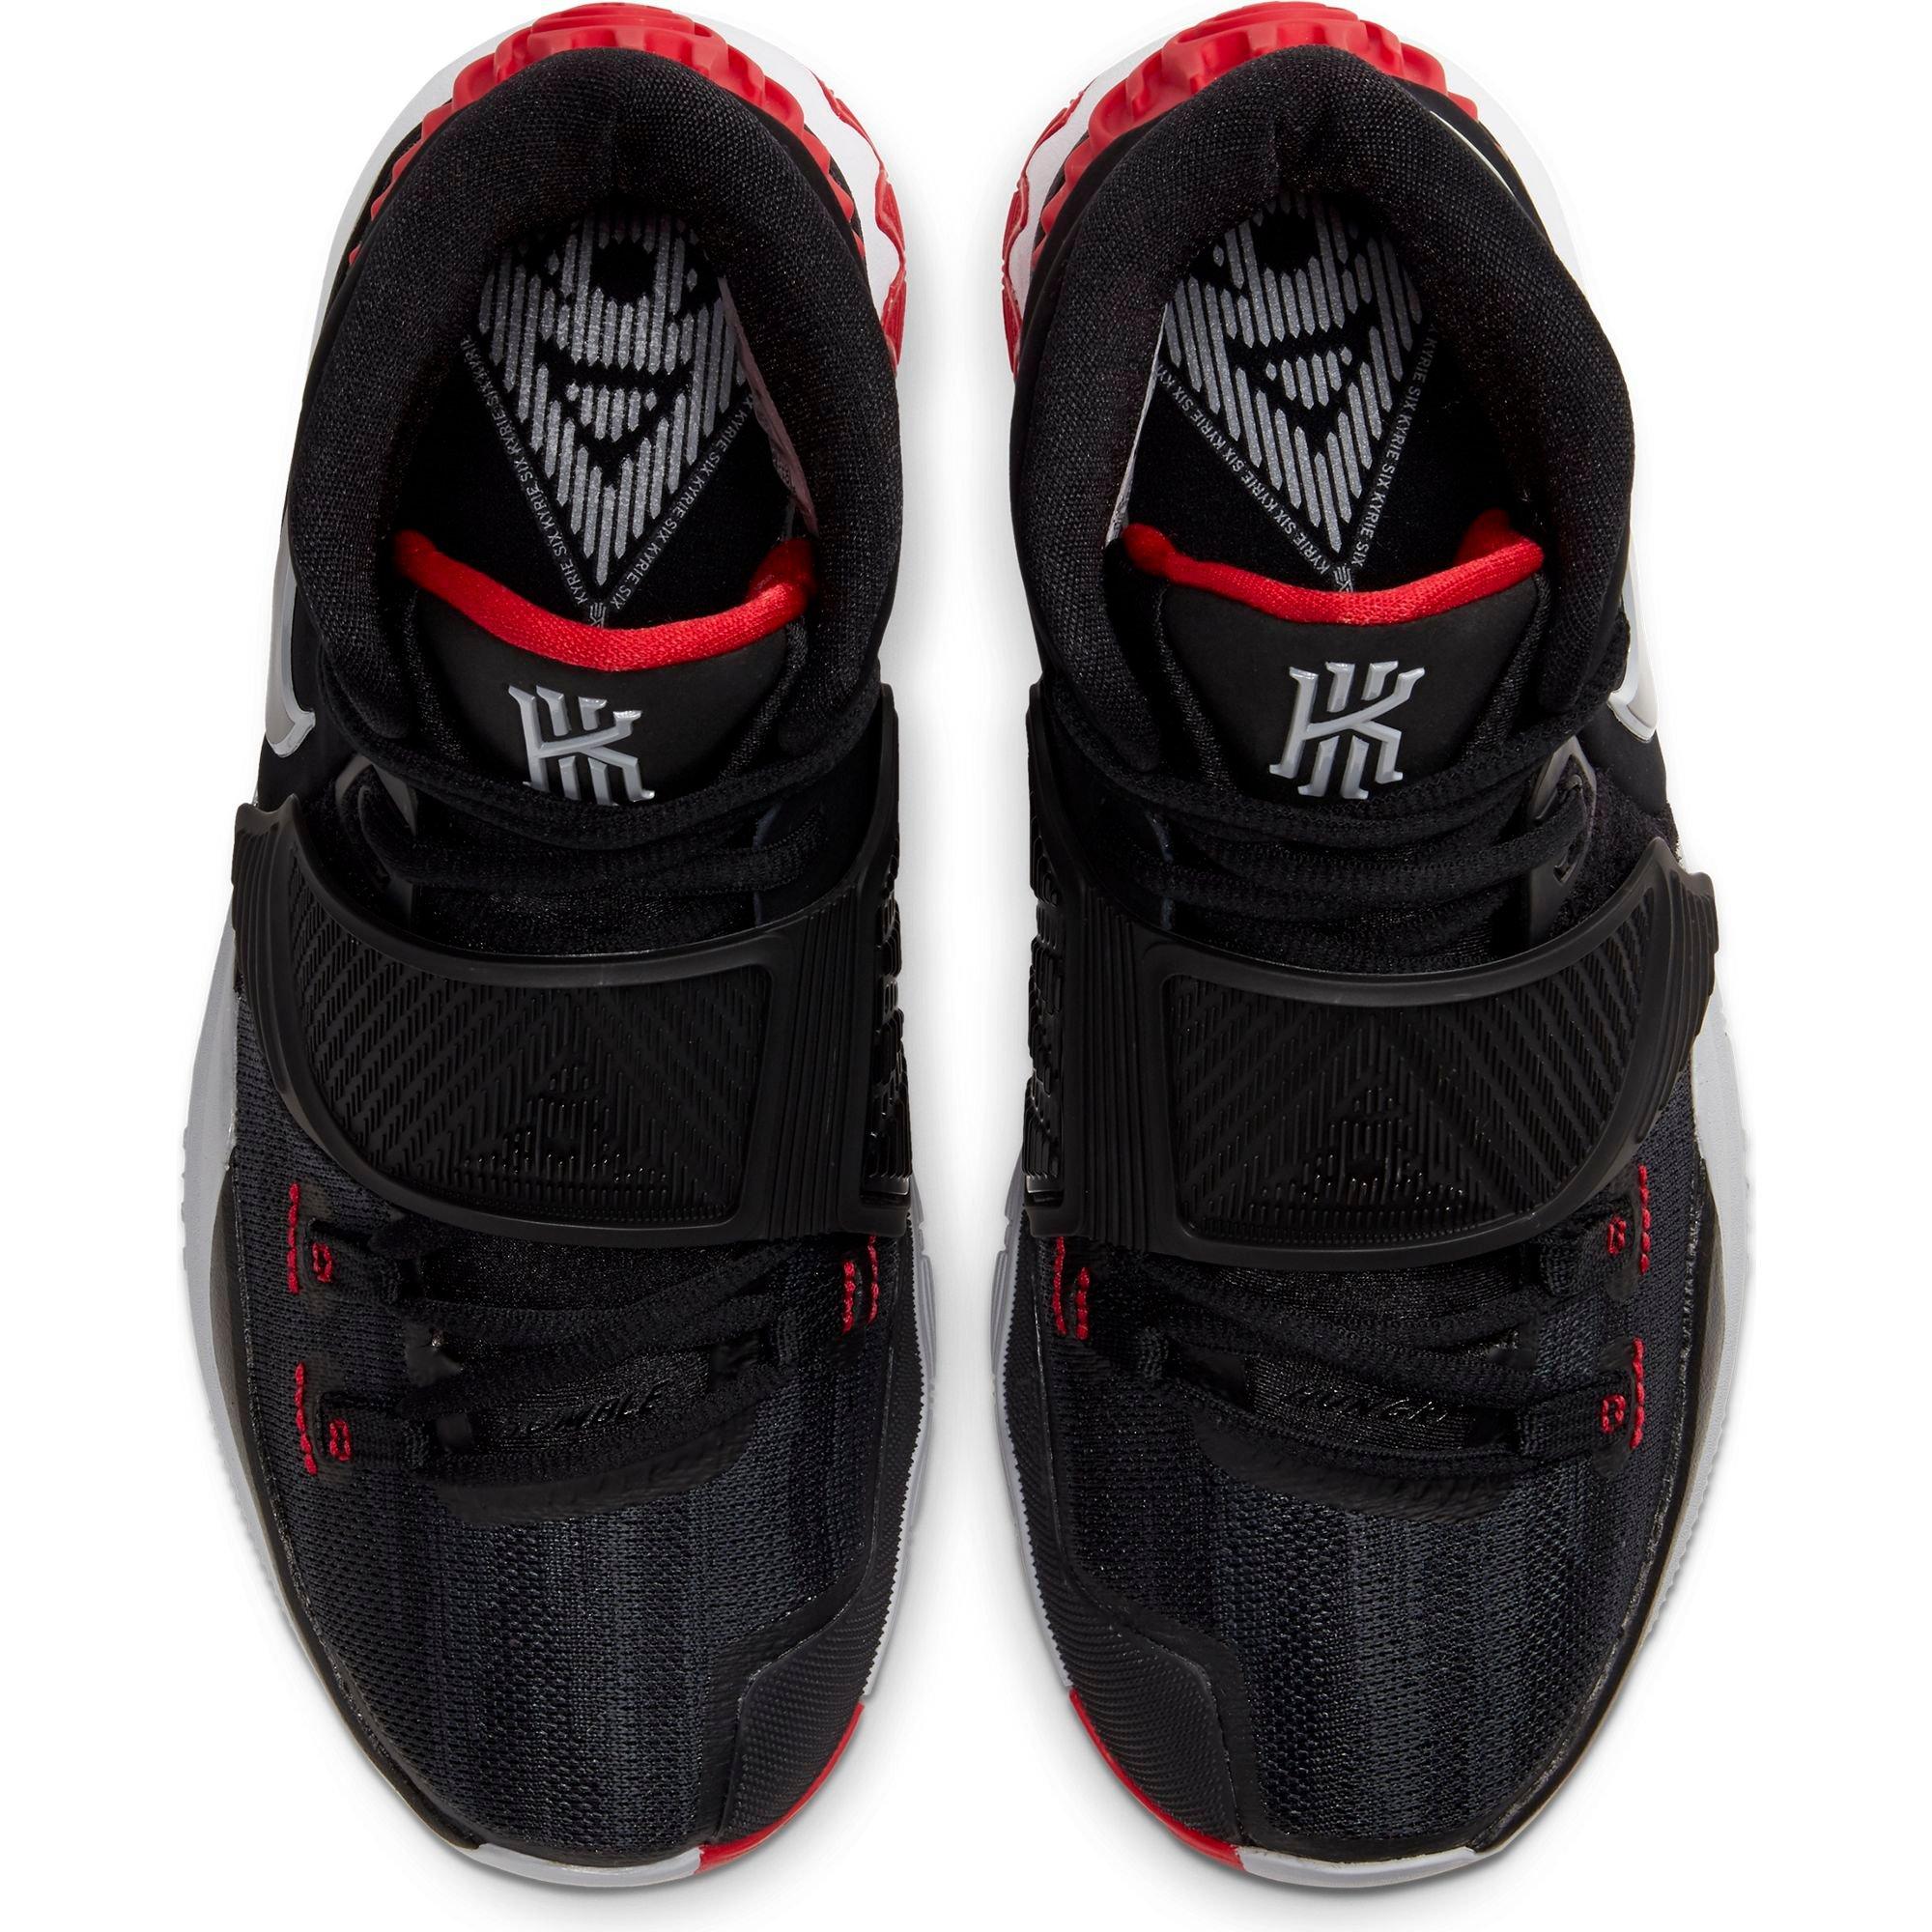 kyrie 6 black and red